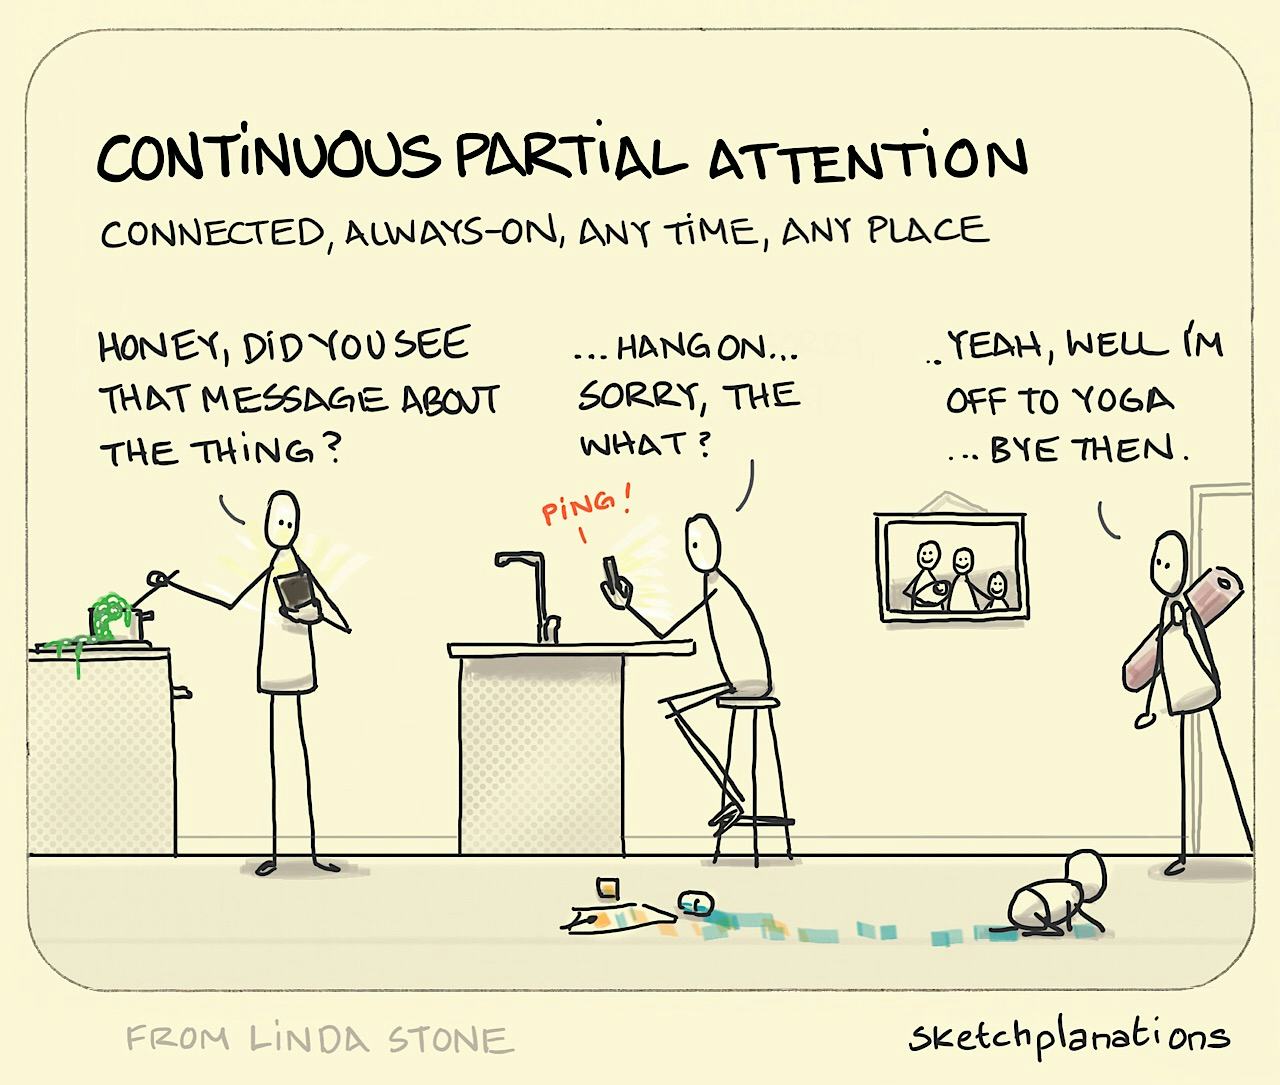 Continuous partial attention - Sketchplanations